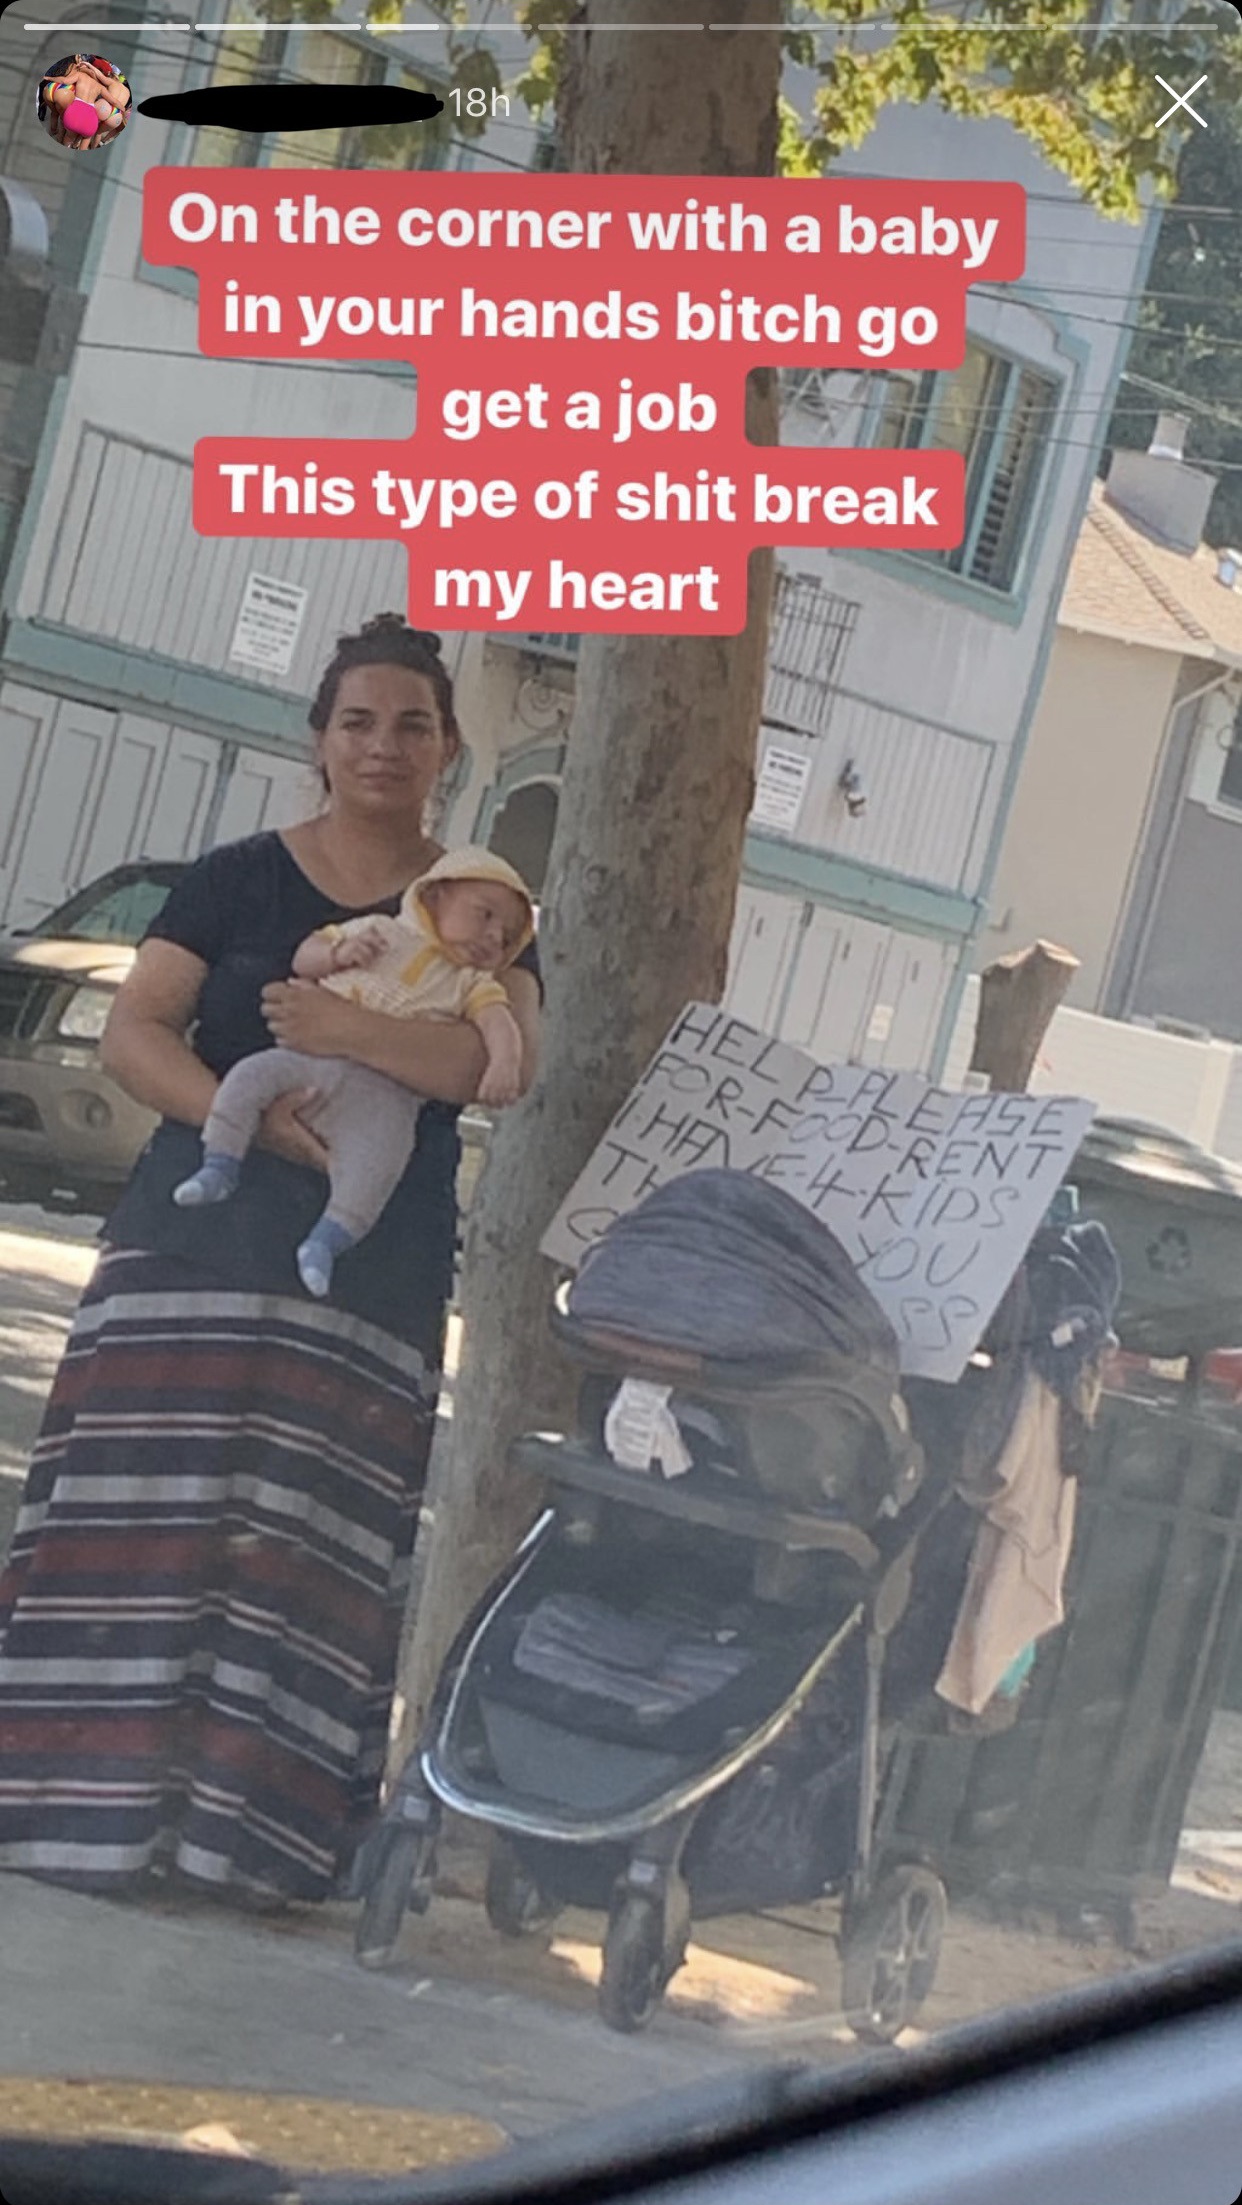 car - On the corner with a baby in your hands bitch go get a job This type of shit break my heart